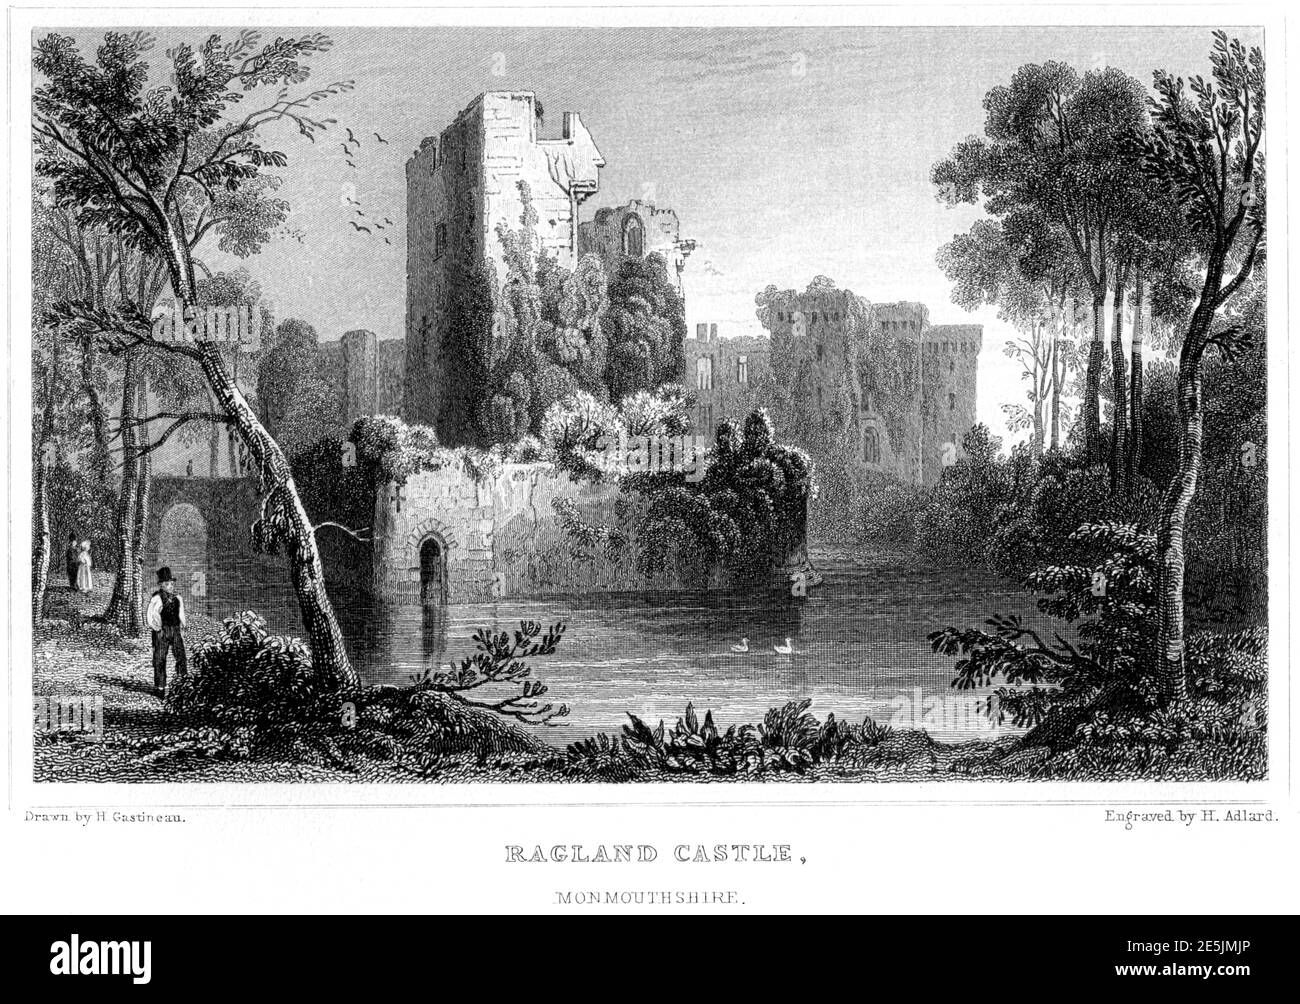 An engraving of Ragland (Raglan) Castle Monmouthshire scanned at high resolution from a book published in 1854.Believed copyright free. Stock Photo